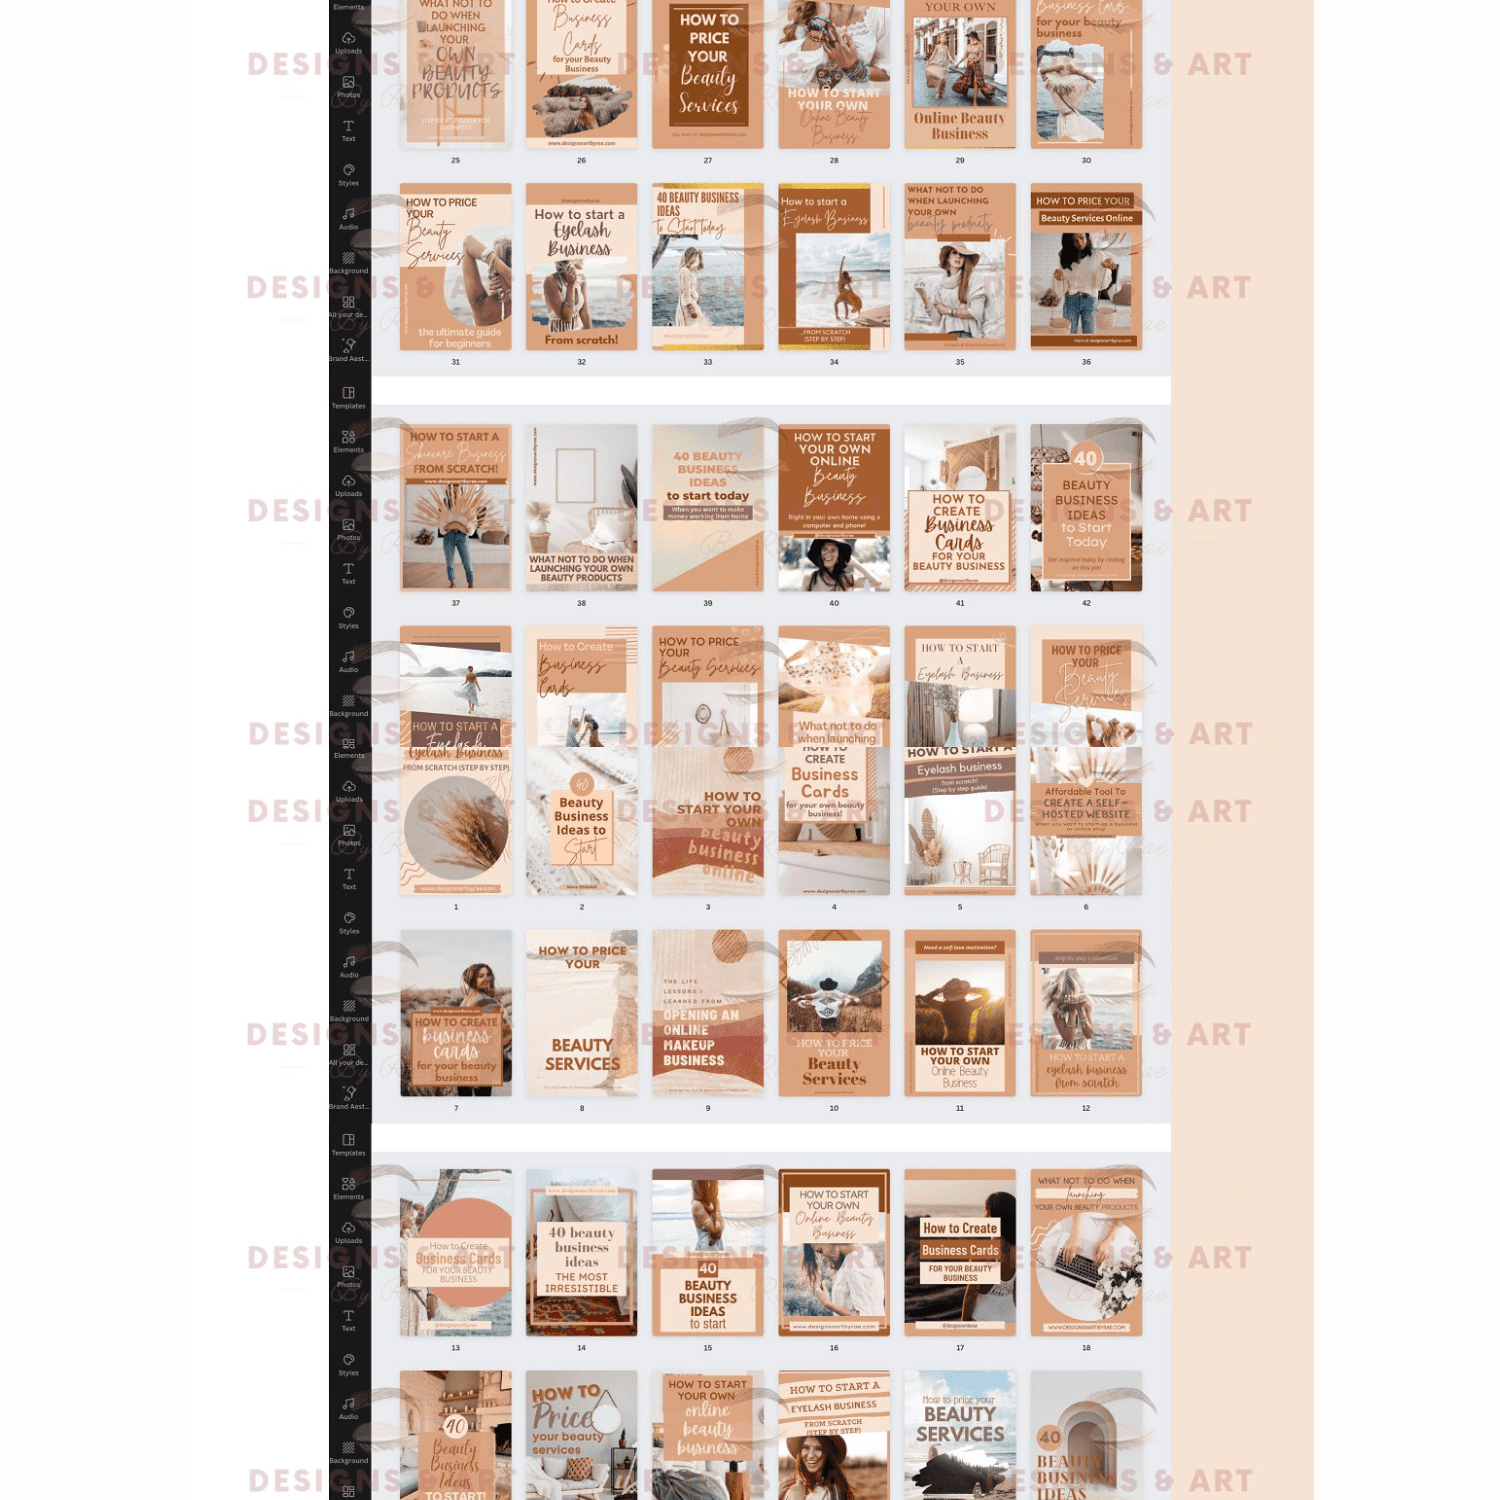 50 Boho Pinterest Templates created by Designs & Art by Rae.